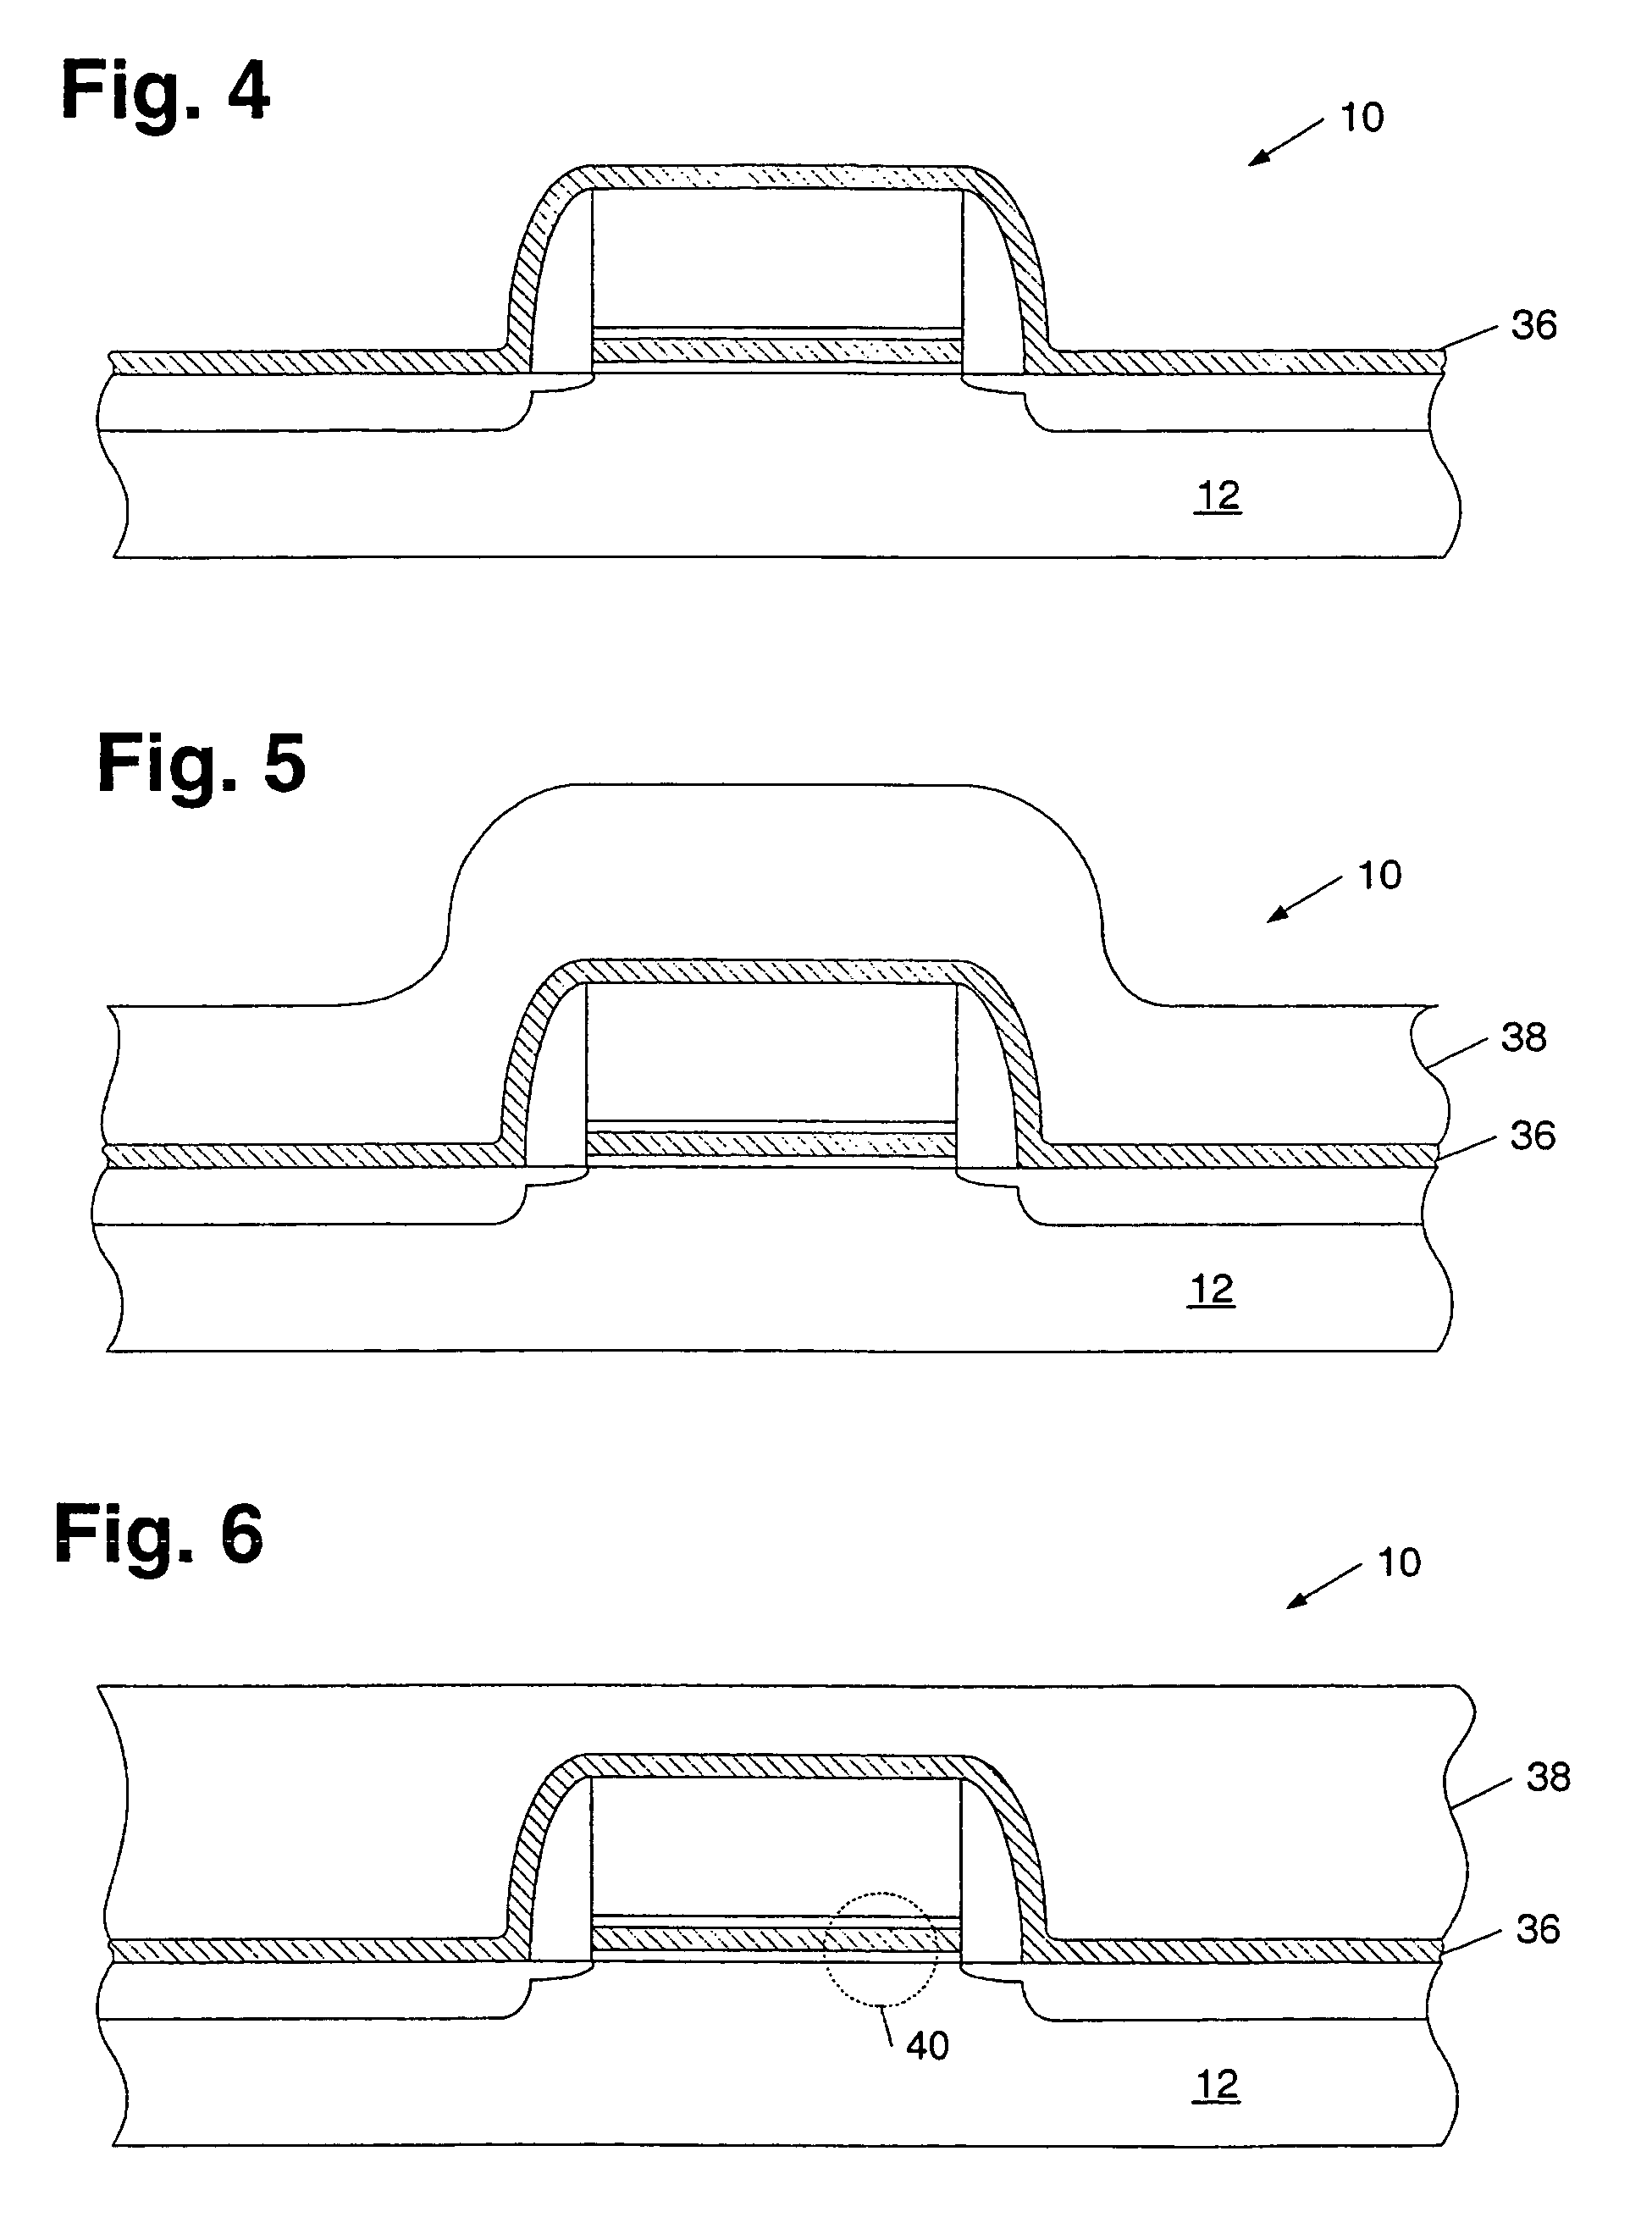 SONOS structure including a deuterated oxide-silicon interface and method for making the same